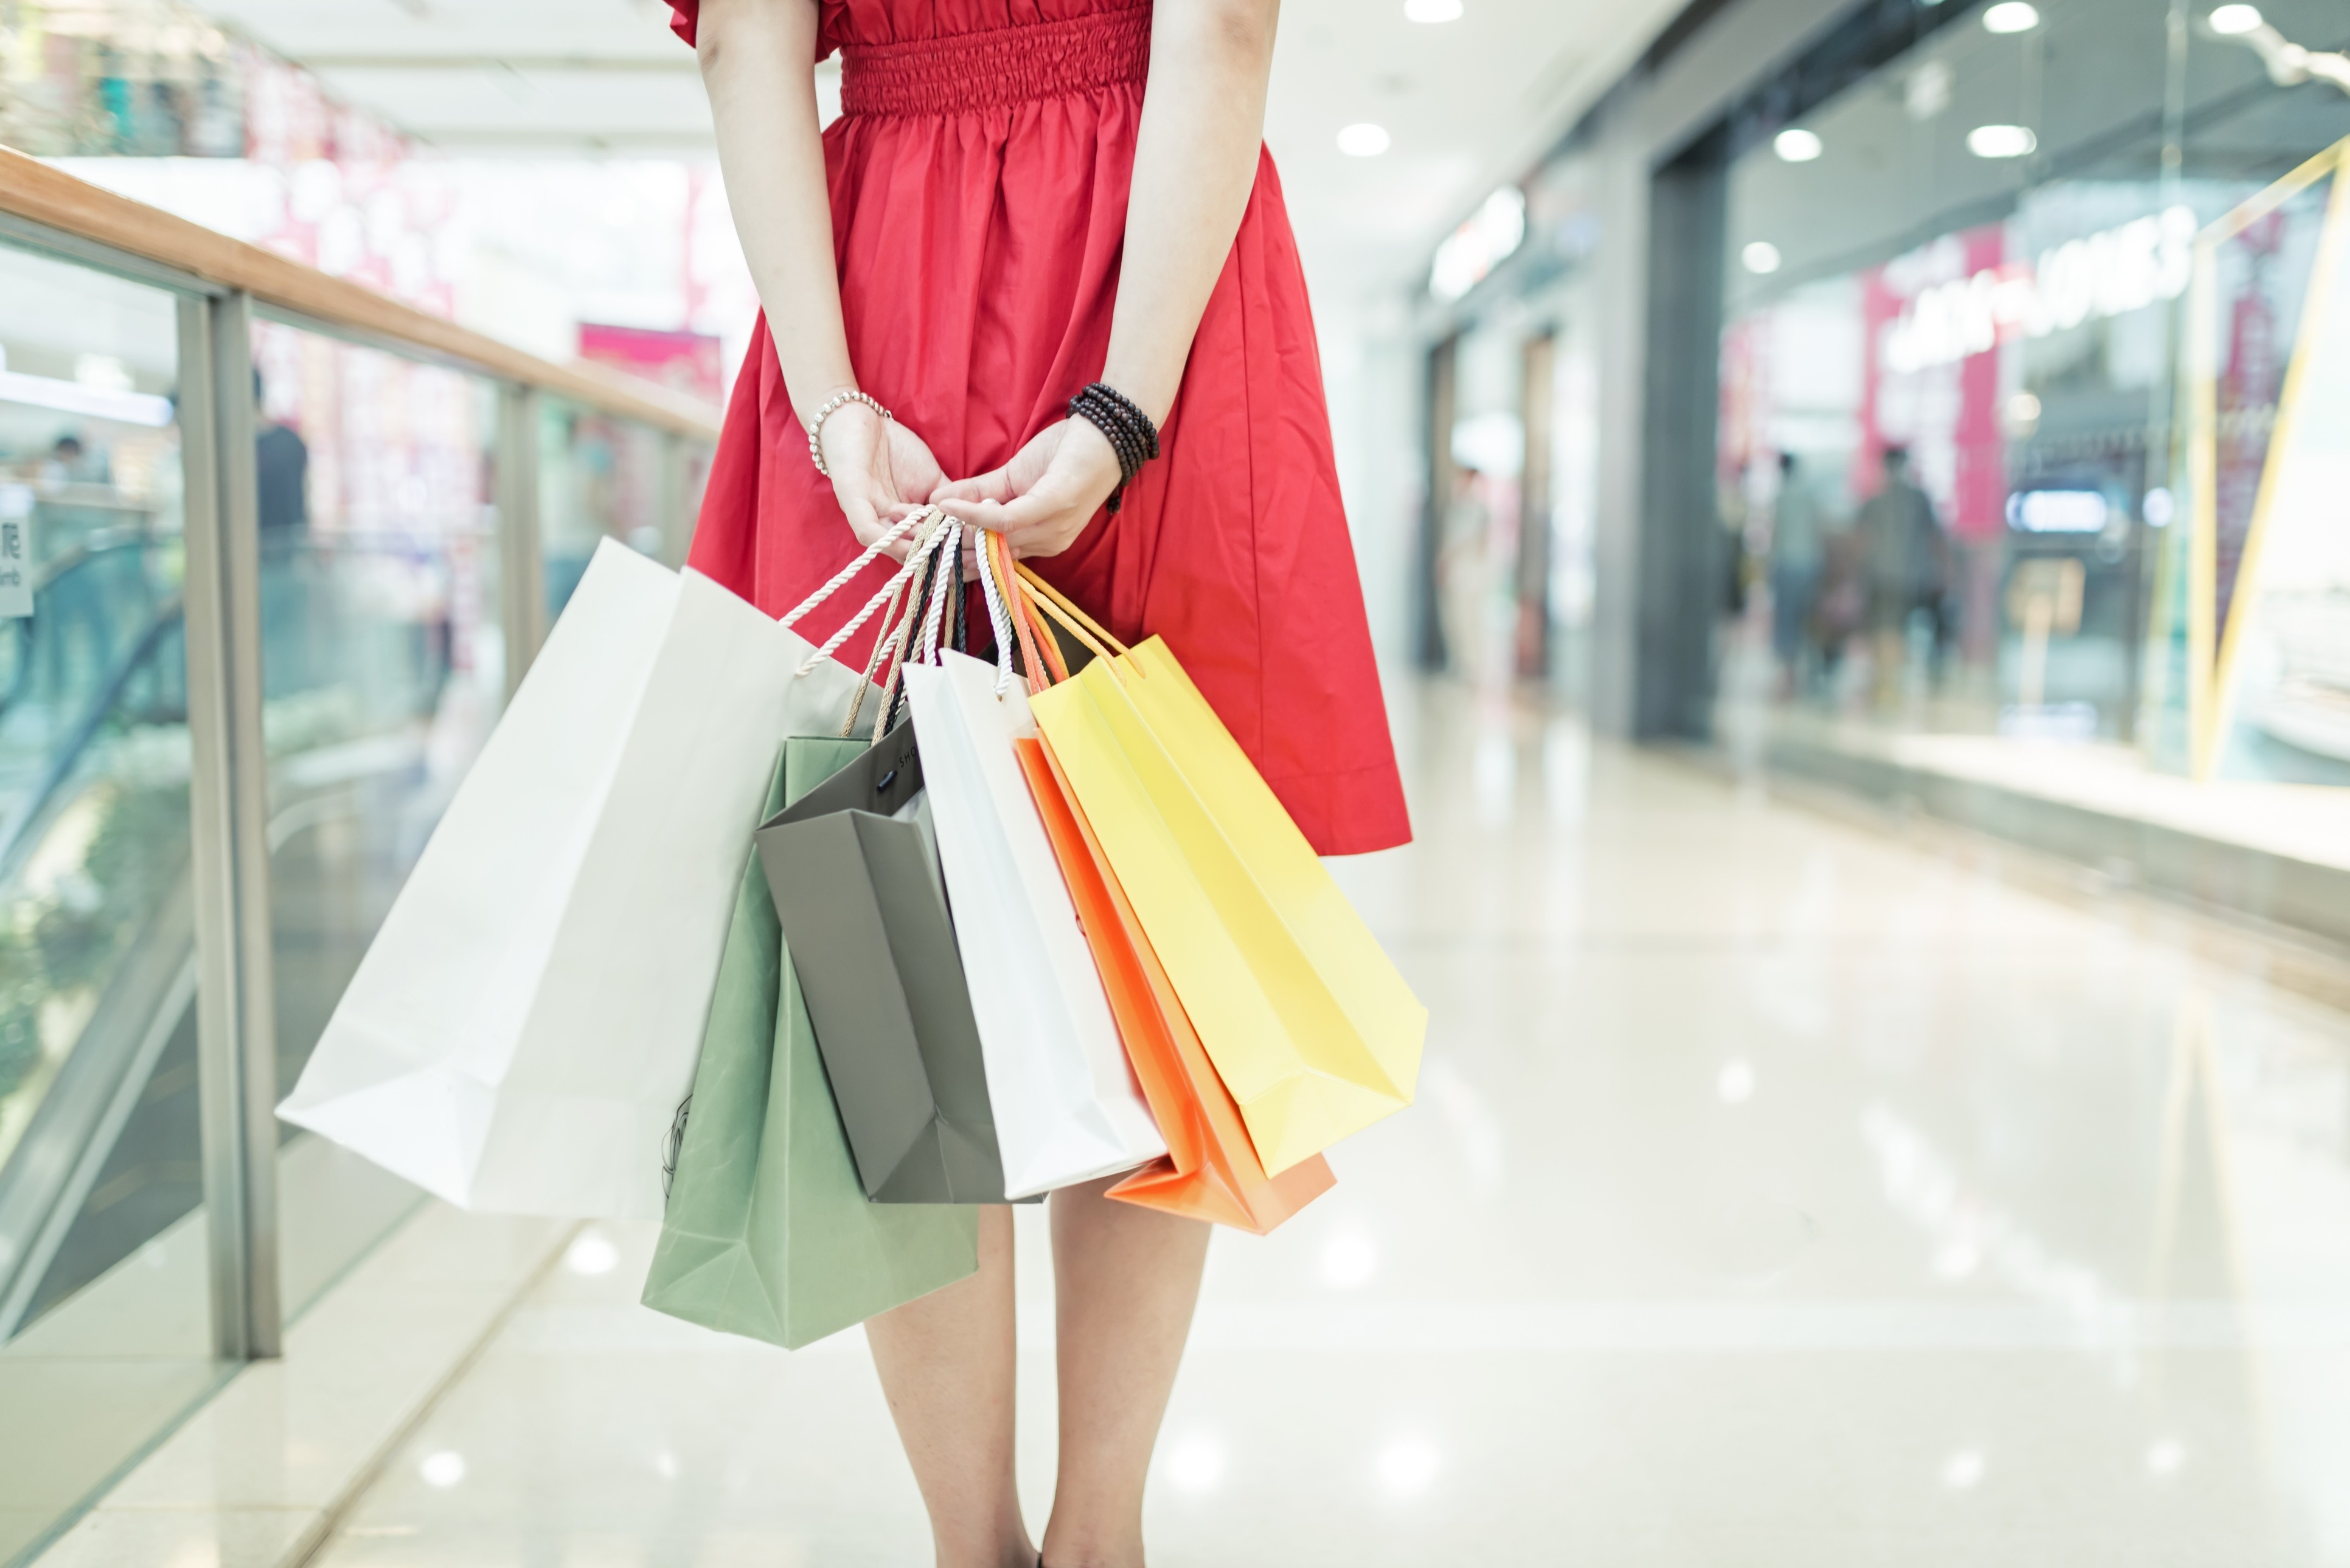 Industry players said demand for mystery shopping was rising in Hong Kong as more companies look to improving their service quality. Photo Getty/iStock